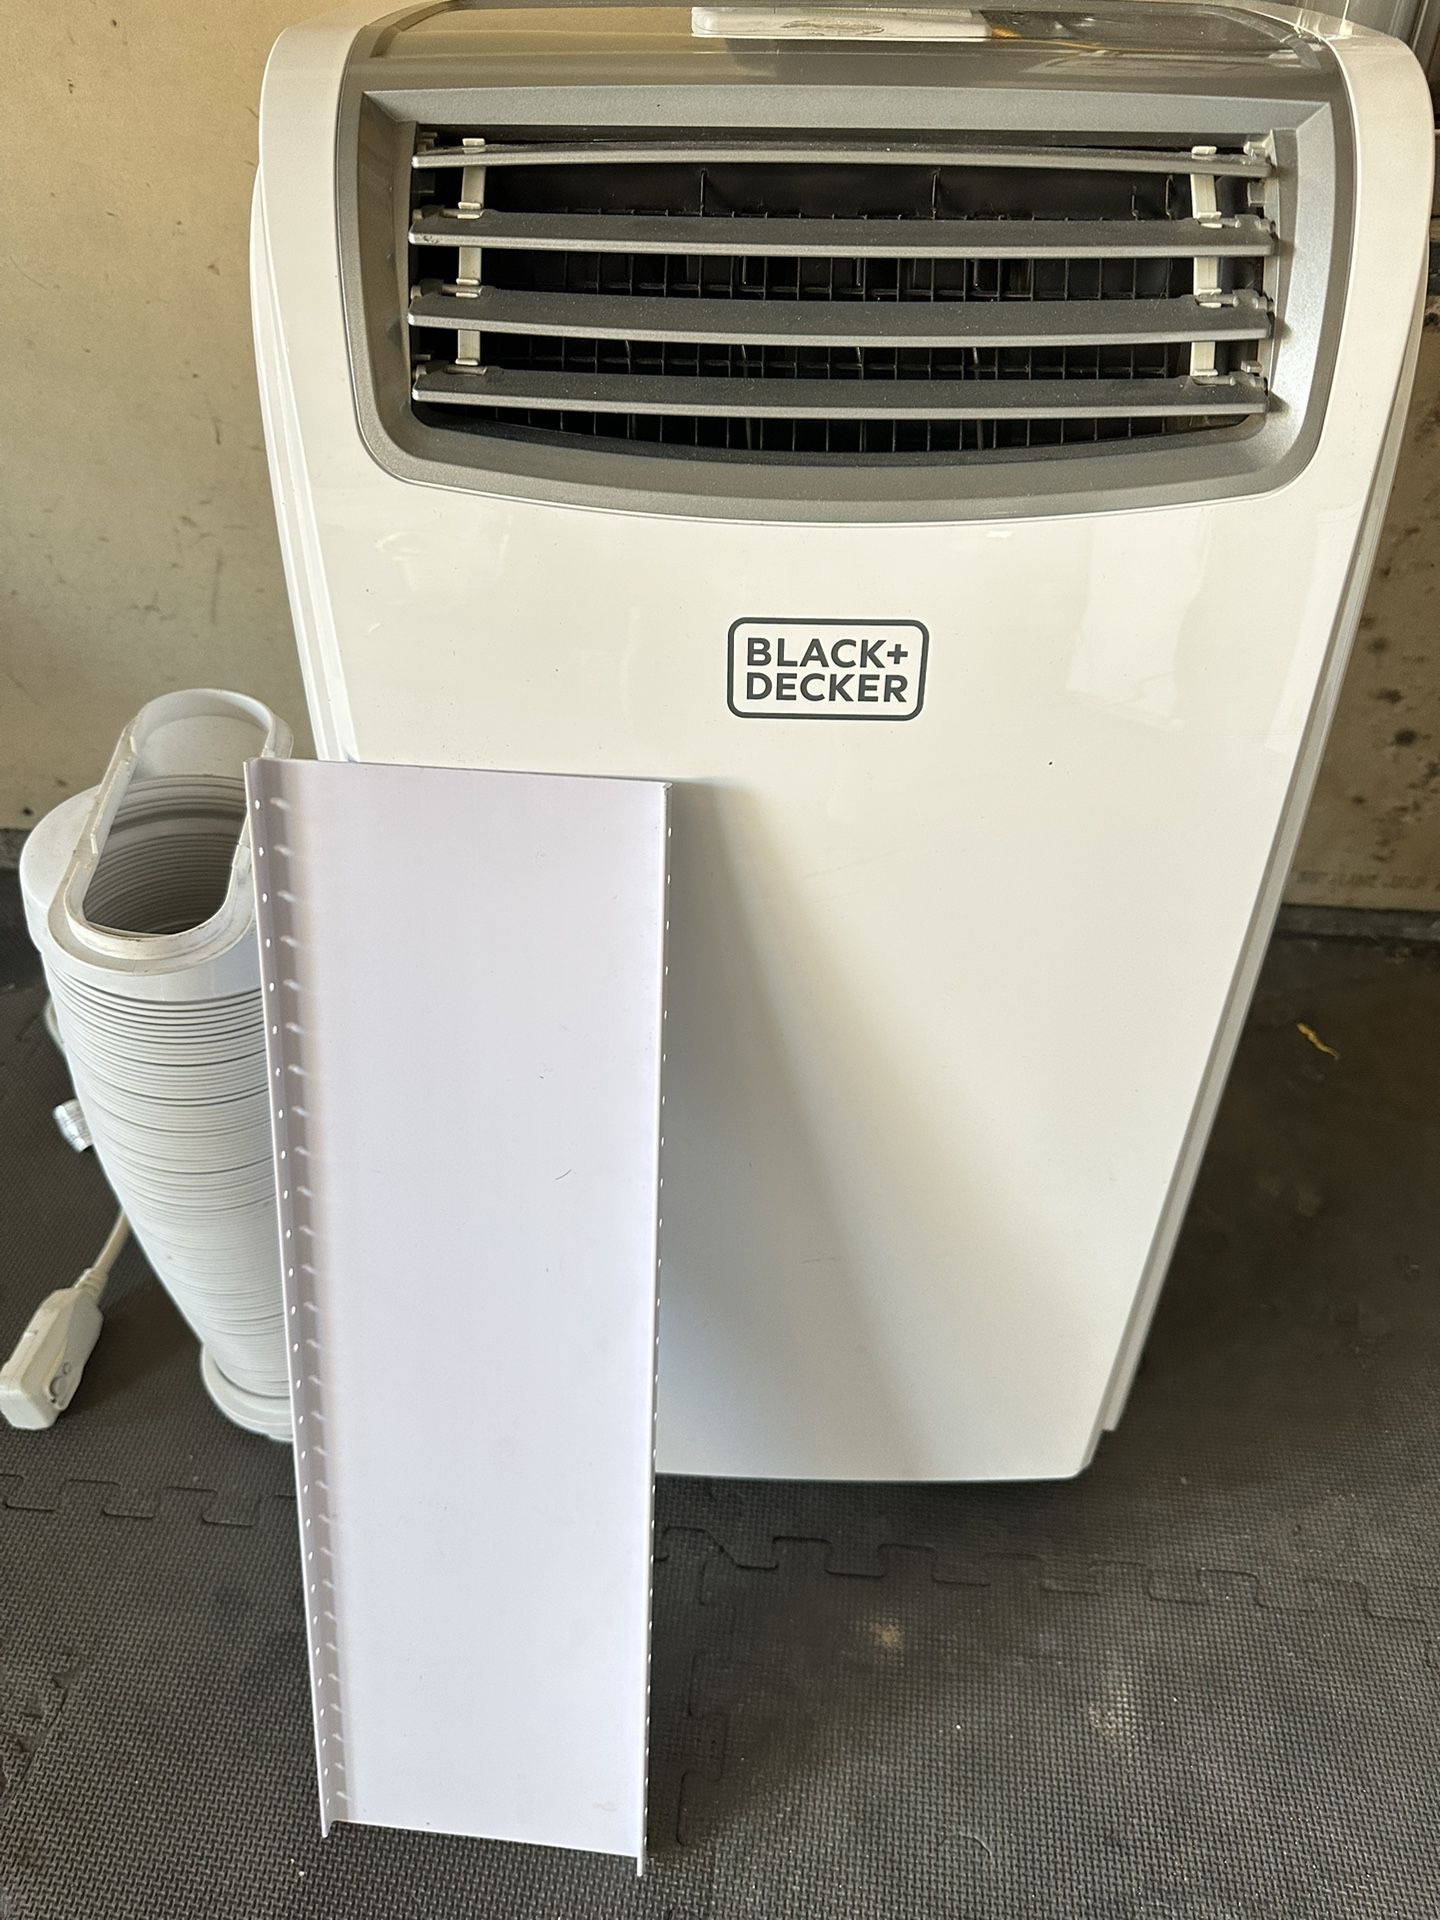 Black & Decker Air Conditioner With Remote for Sale in Fresno, CA - OfferUp